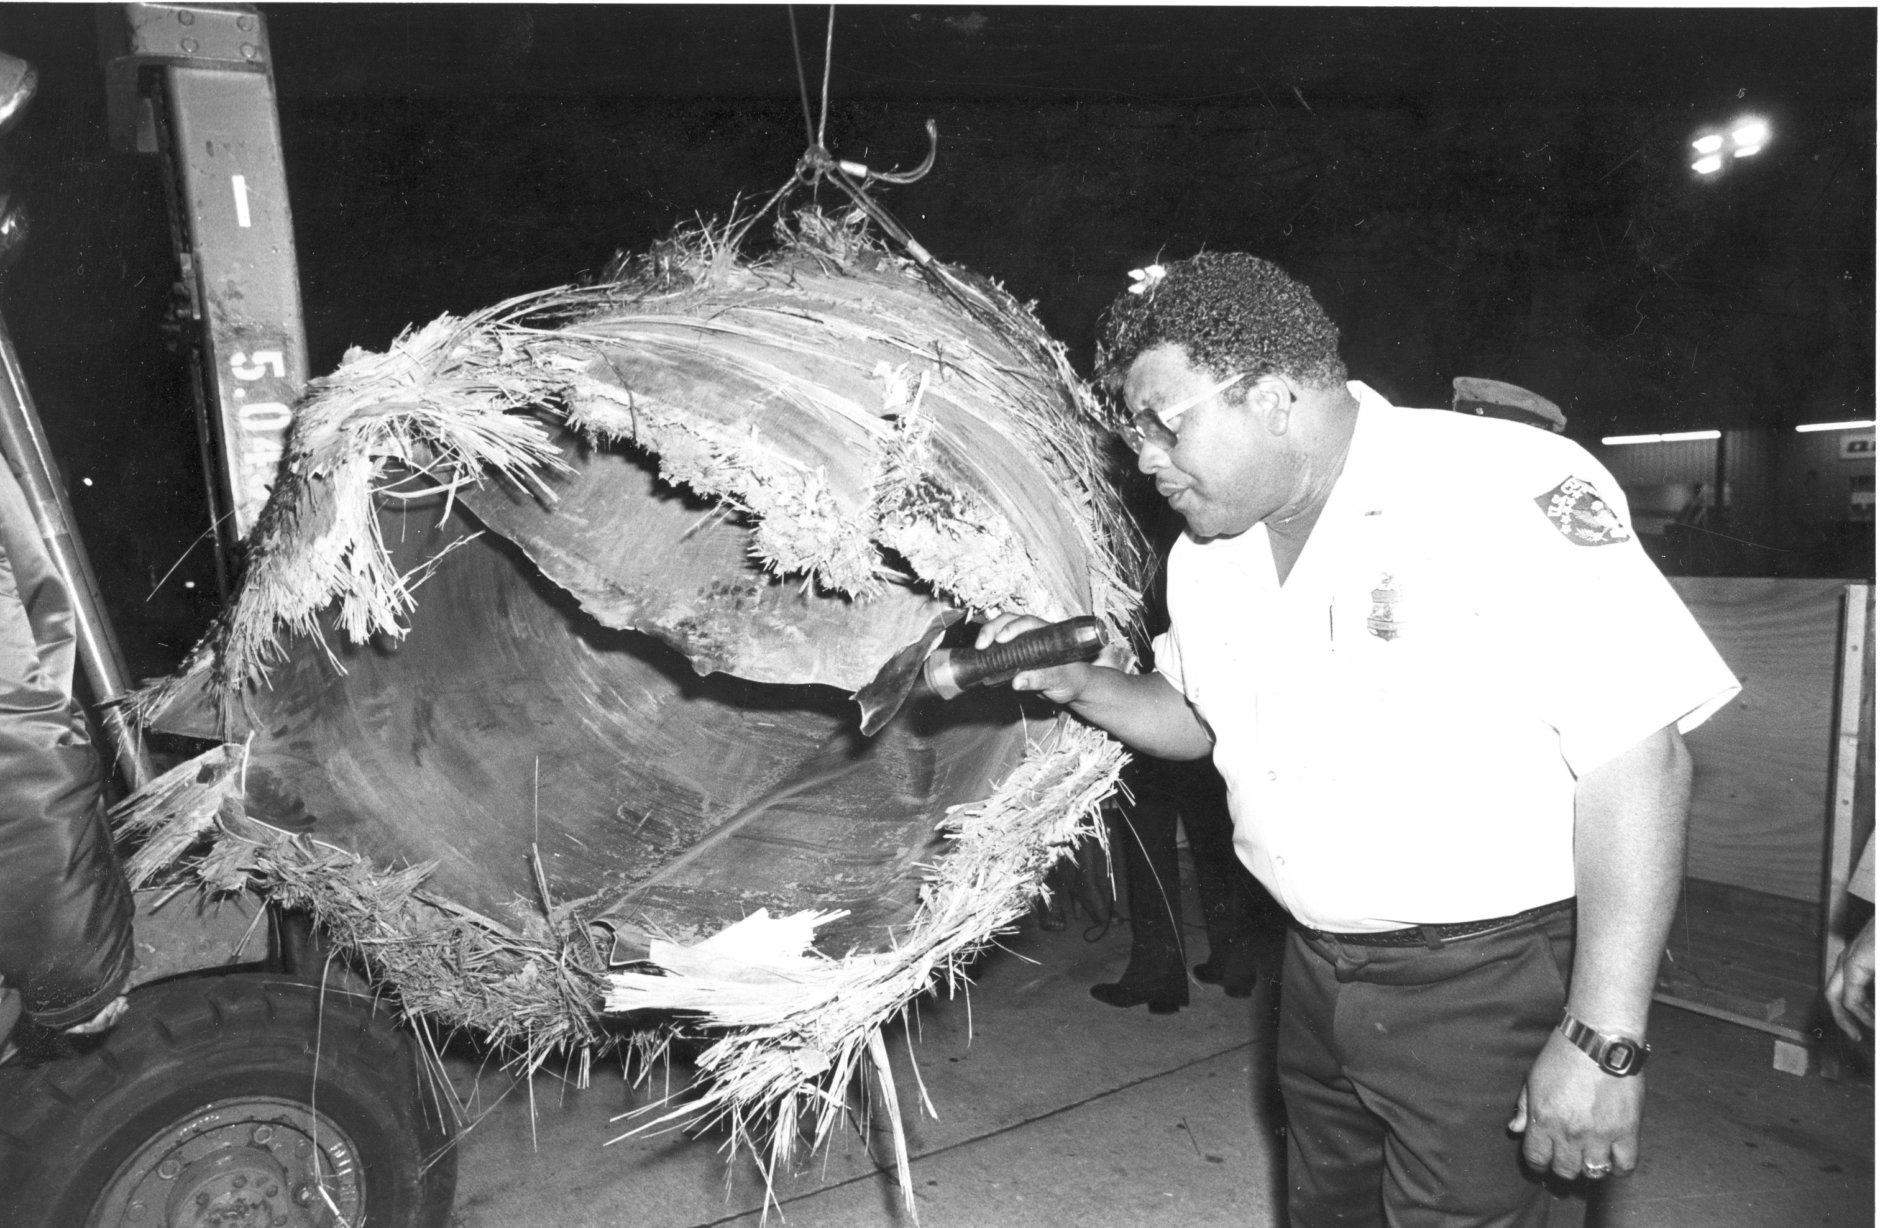 U.S. Customs official Oliver Seymour inspects the largest piece of the downed Skylab at the San Francisco International Airport, Ca., Wedenesday night, July 25, 1979.  The one-ton piece wreckage was found in Australia two weeks ago.   (AP Photo)